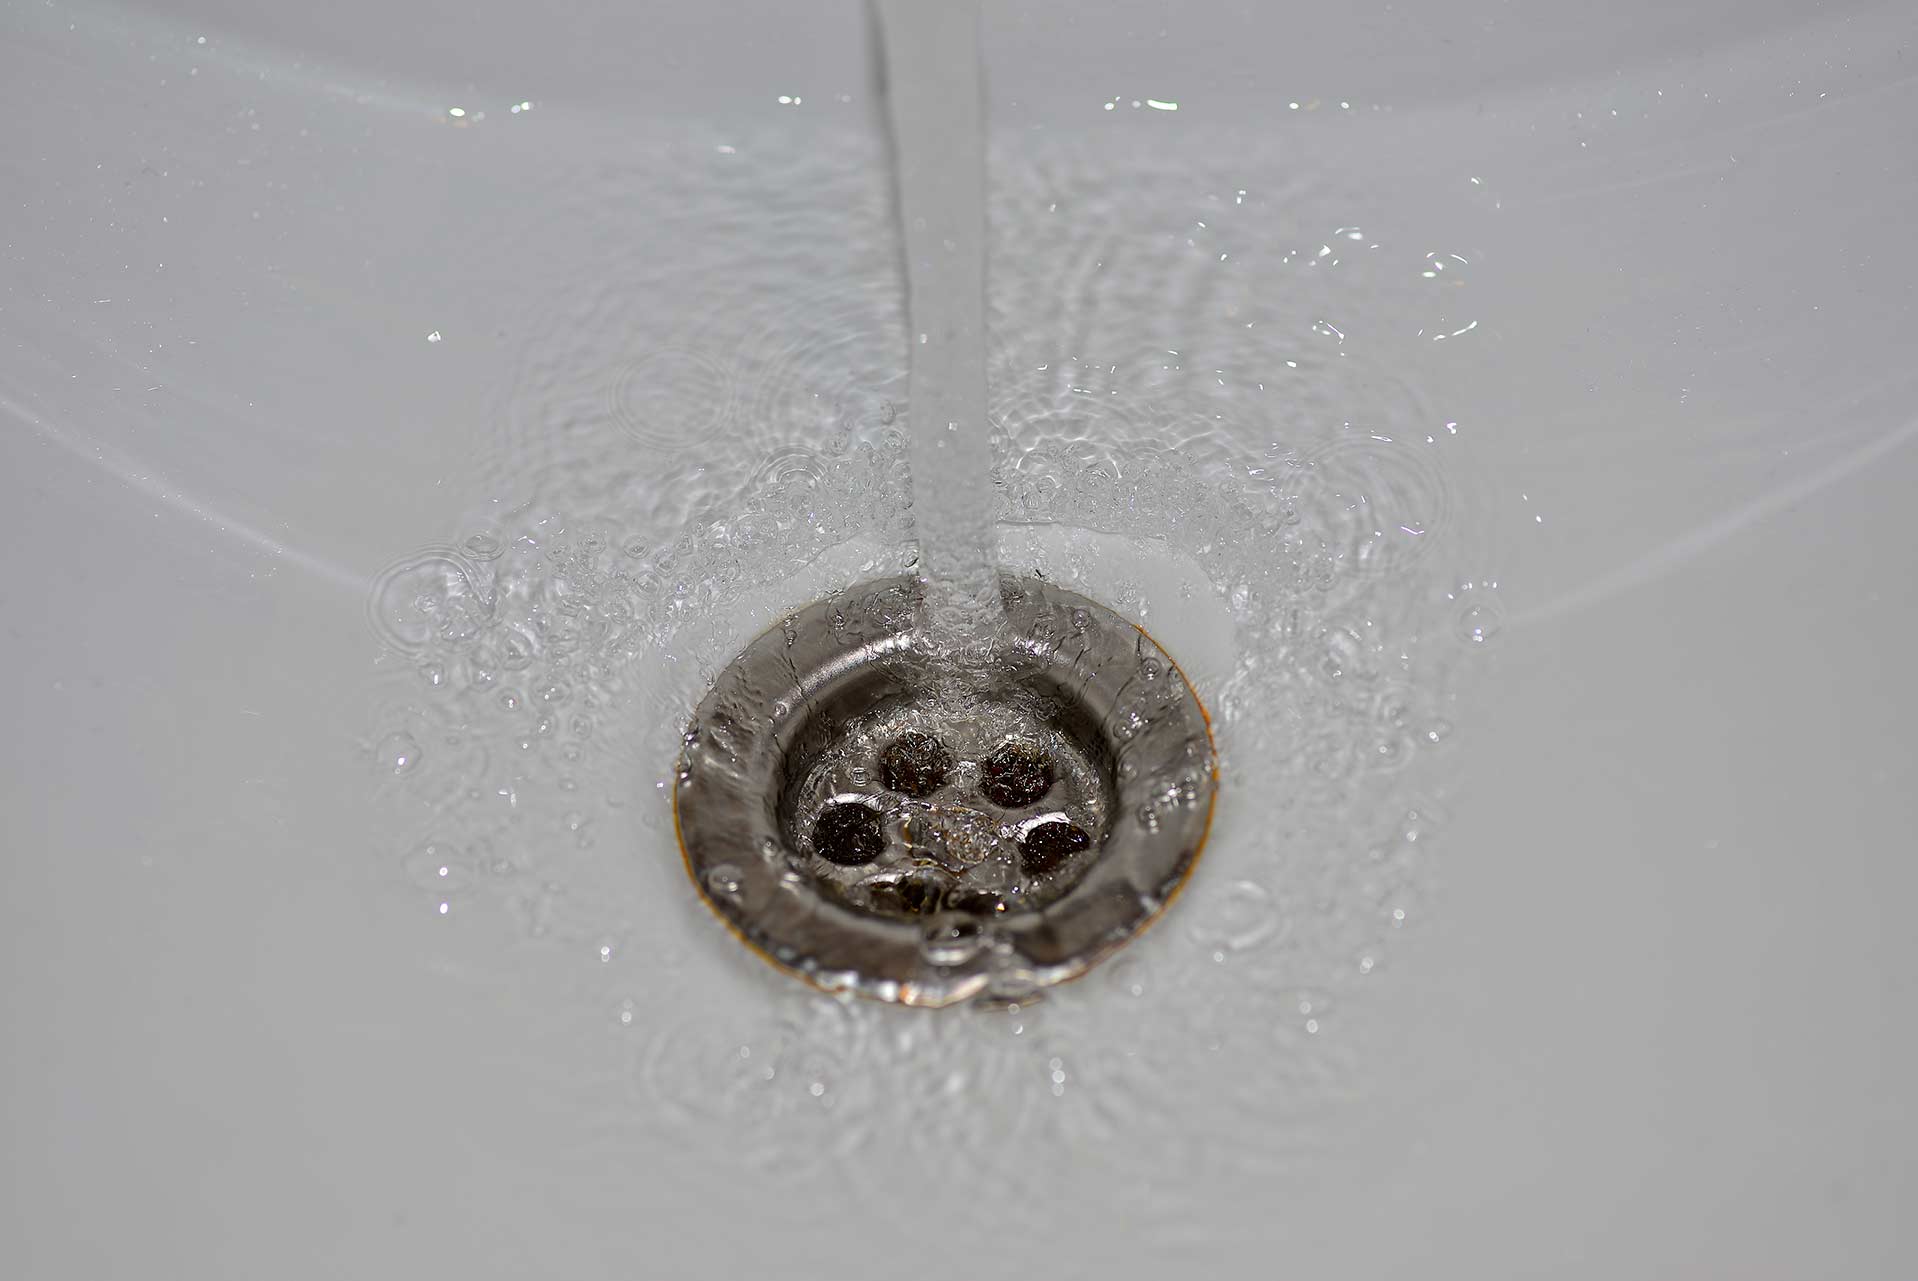 A2B Drains provides services to unblock blocked sinks and drains for properties in Clerkenwell.